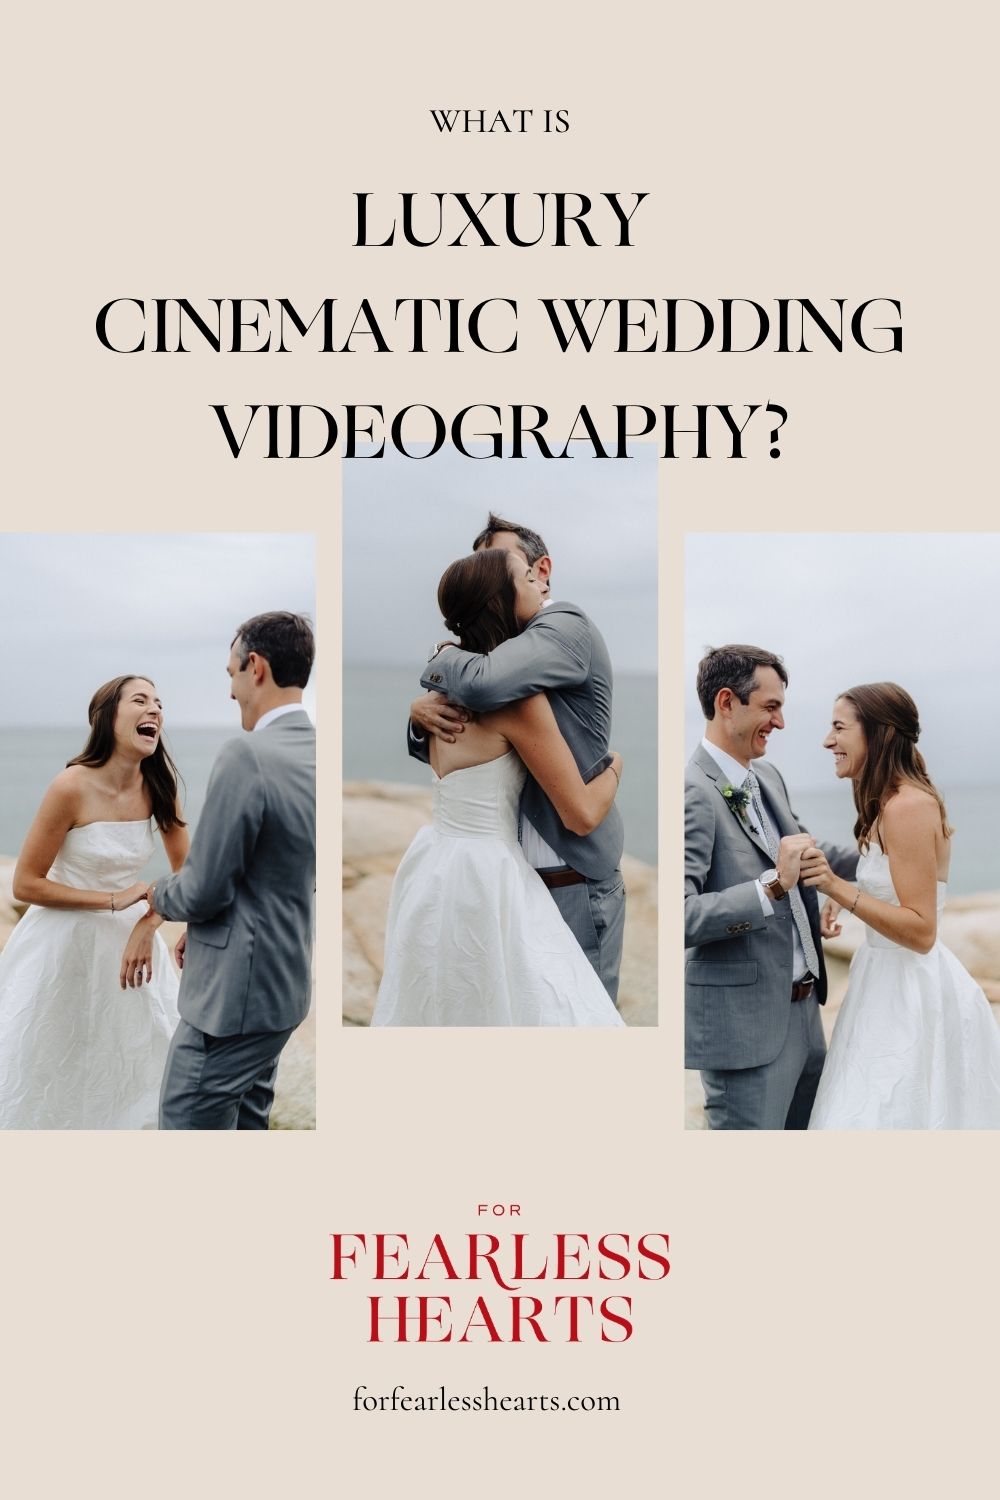 Collage of bride and groom candidly laughing and posing with each other; image overlaid with text that reads What is Luxury Cinematic Wedding Videography?